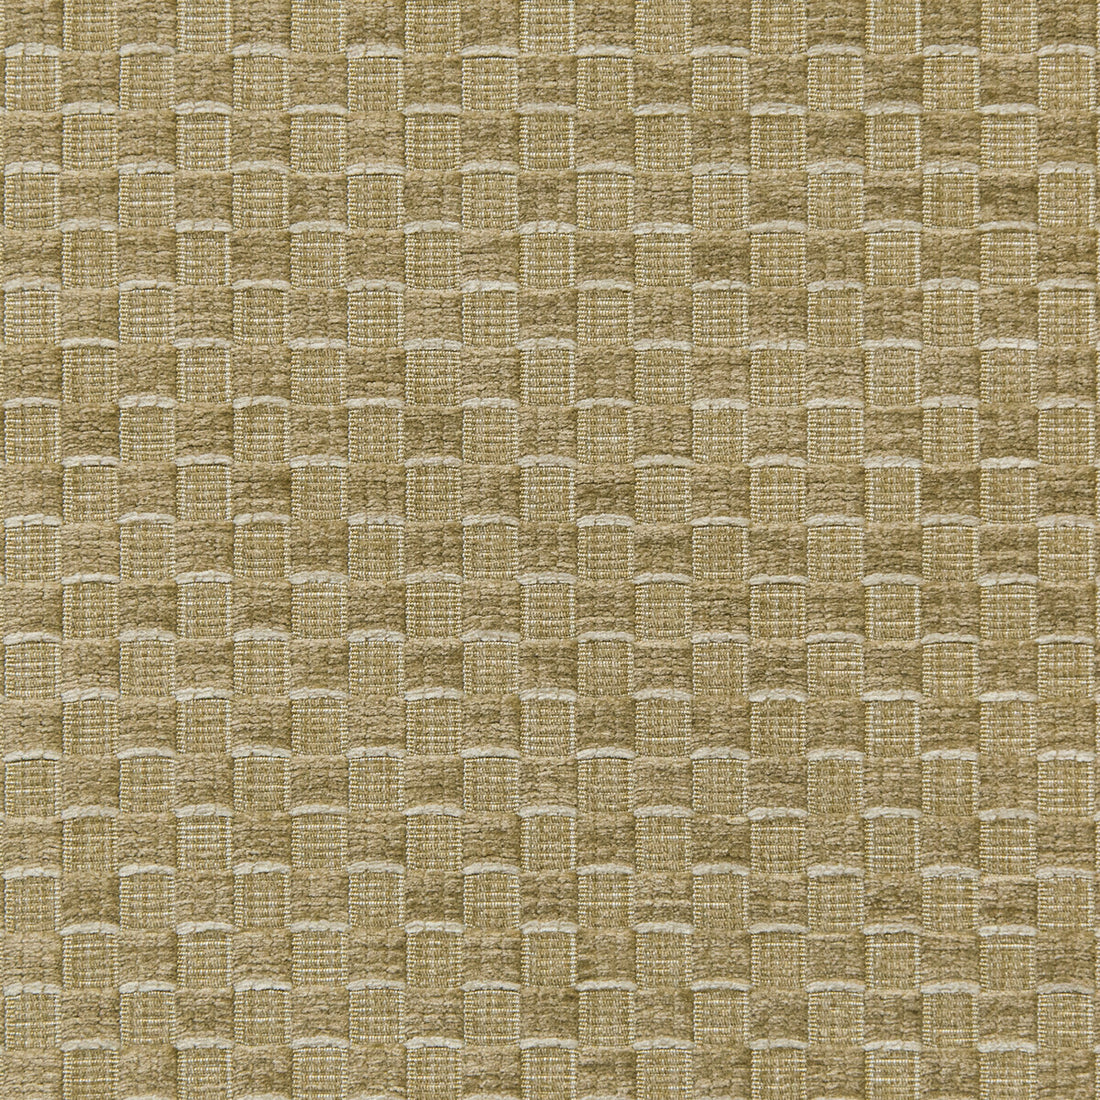 Allonby Weave fabric in flax color - pattern 2020101.106.0 - by Lee Jofa in the Linford Weaves collection